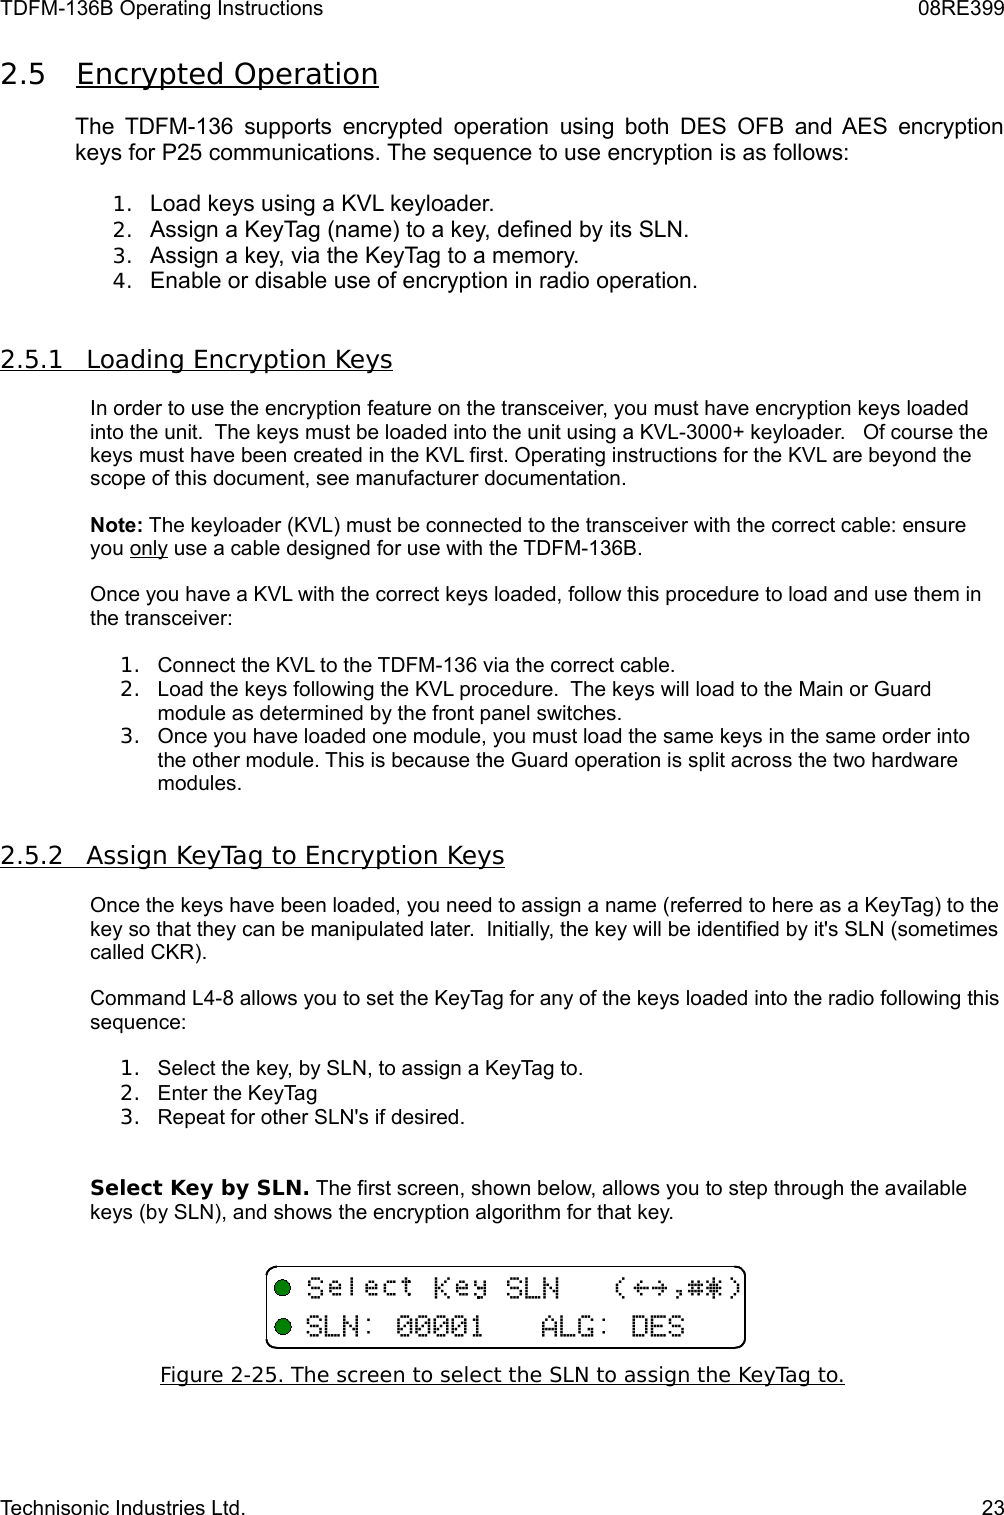 TDFM-136B Operating Instructions 08RE3992.5 Encrypted Operation    The TDFM-136 supports encrypted operation using both DES OFB and AES encryption keys for P25 communications. The sequence to use encryption is as follows:1. Load keys using a KVL keyloader.2. Assign a KeyTag (name) to a key, defined by its SLN.3. Assign a key, via the KeyTag to a memory.4. Enable or disable use of encryption in radio operation.2.5.1         Loading Encryption Keys   In order to use the encryption feature on the transceiver, you must have encryption keys loaded into the unit.  The keys must be loaded into the unit using a KVL-3000+ keyloader.   Of course the keys must have been created in the KVL first. Operating instructions for the KVL are beyond the scope of this document, see manufacturer documentation.Note: The keyloader (KVL) must be connected to the transceiver with the correct cable: ensure you only use a cable designed for use with the TDFM-136B.Once you have a KVL with the correct keys loaded, follow this procedure to load and use them in the transceiver:1. Connect the KVL to the TDFM-136 via the correct cable.2. Load the keys following the KVL procedure.  The keys will load to the Main or Guard module as determined by the front panel switches.3. Once you have loaded one module, you must load the same keys in the same order into the other module. This is because the Guard operation is split across the two hardware modules.2.5.2         Assign KeyTag to Encryption Keys   Once the keys have been loaded, you need to assign a name (referred to here as a KeyTag) to the key so that they can be manipulated later.  Initially, the key will be identified by it&apos;s SLN (sometimes called CKR).Command L4-8 allows you to set the KeyTag for any of the keys loaded into the radio following this sequence:1. Select the key, by SLN, to assign a KeyTag to.2. Enter the KeyTag3. Repeat for other SLN&apos;s if desired.Select Key by SLN. The first screen, shown below, allows you to step through the available keys (by SLN), and shows the encryption algorithm for that key.Figure 2-   25   . The screen to select the SLN to assign the KeyTag to.   Technisonic Industries Ltd. 23+ F+-,!&gt;?$%&amp;&apos;+-,/6-/+